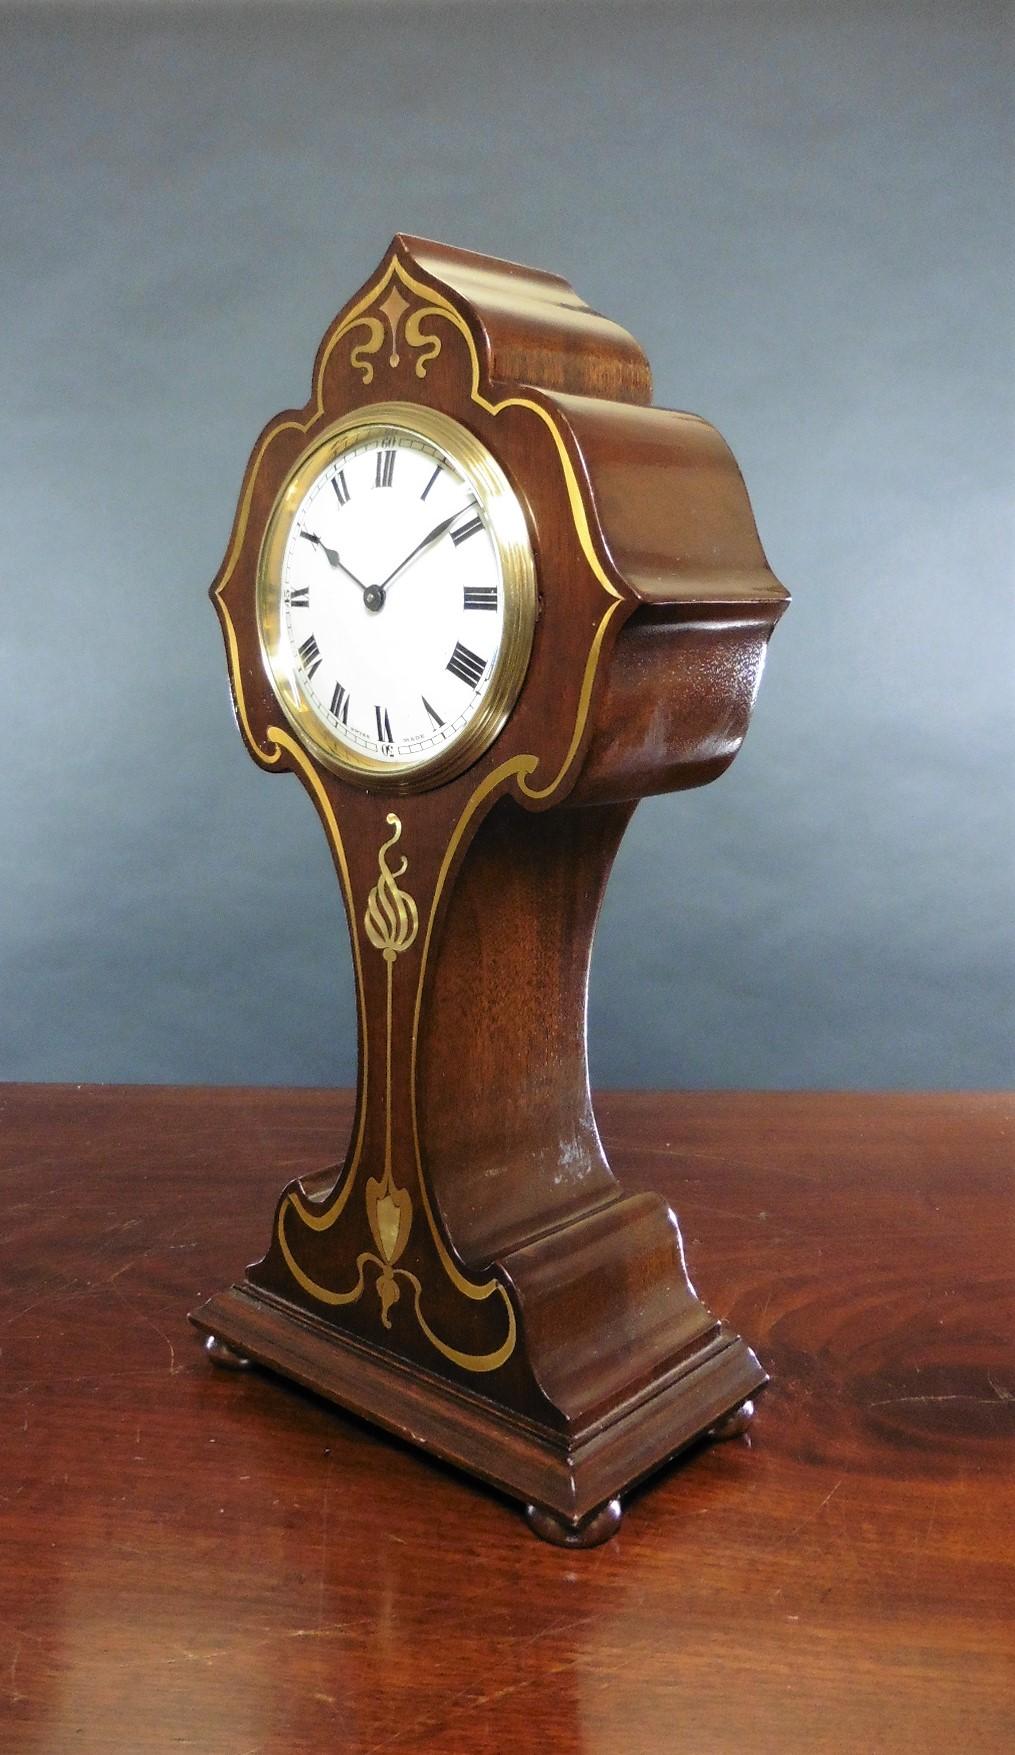 Art Nouveau mahogany mantel clock


Art Nouveau balloon clock standing on a raised plinth and resting on four bun feet in a fine mahogany case with brass and mother of pearl decorative inlay.


Enamel dial with Roman numerals, original ‘blued’